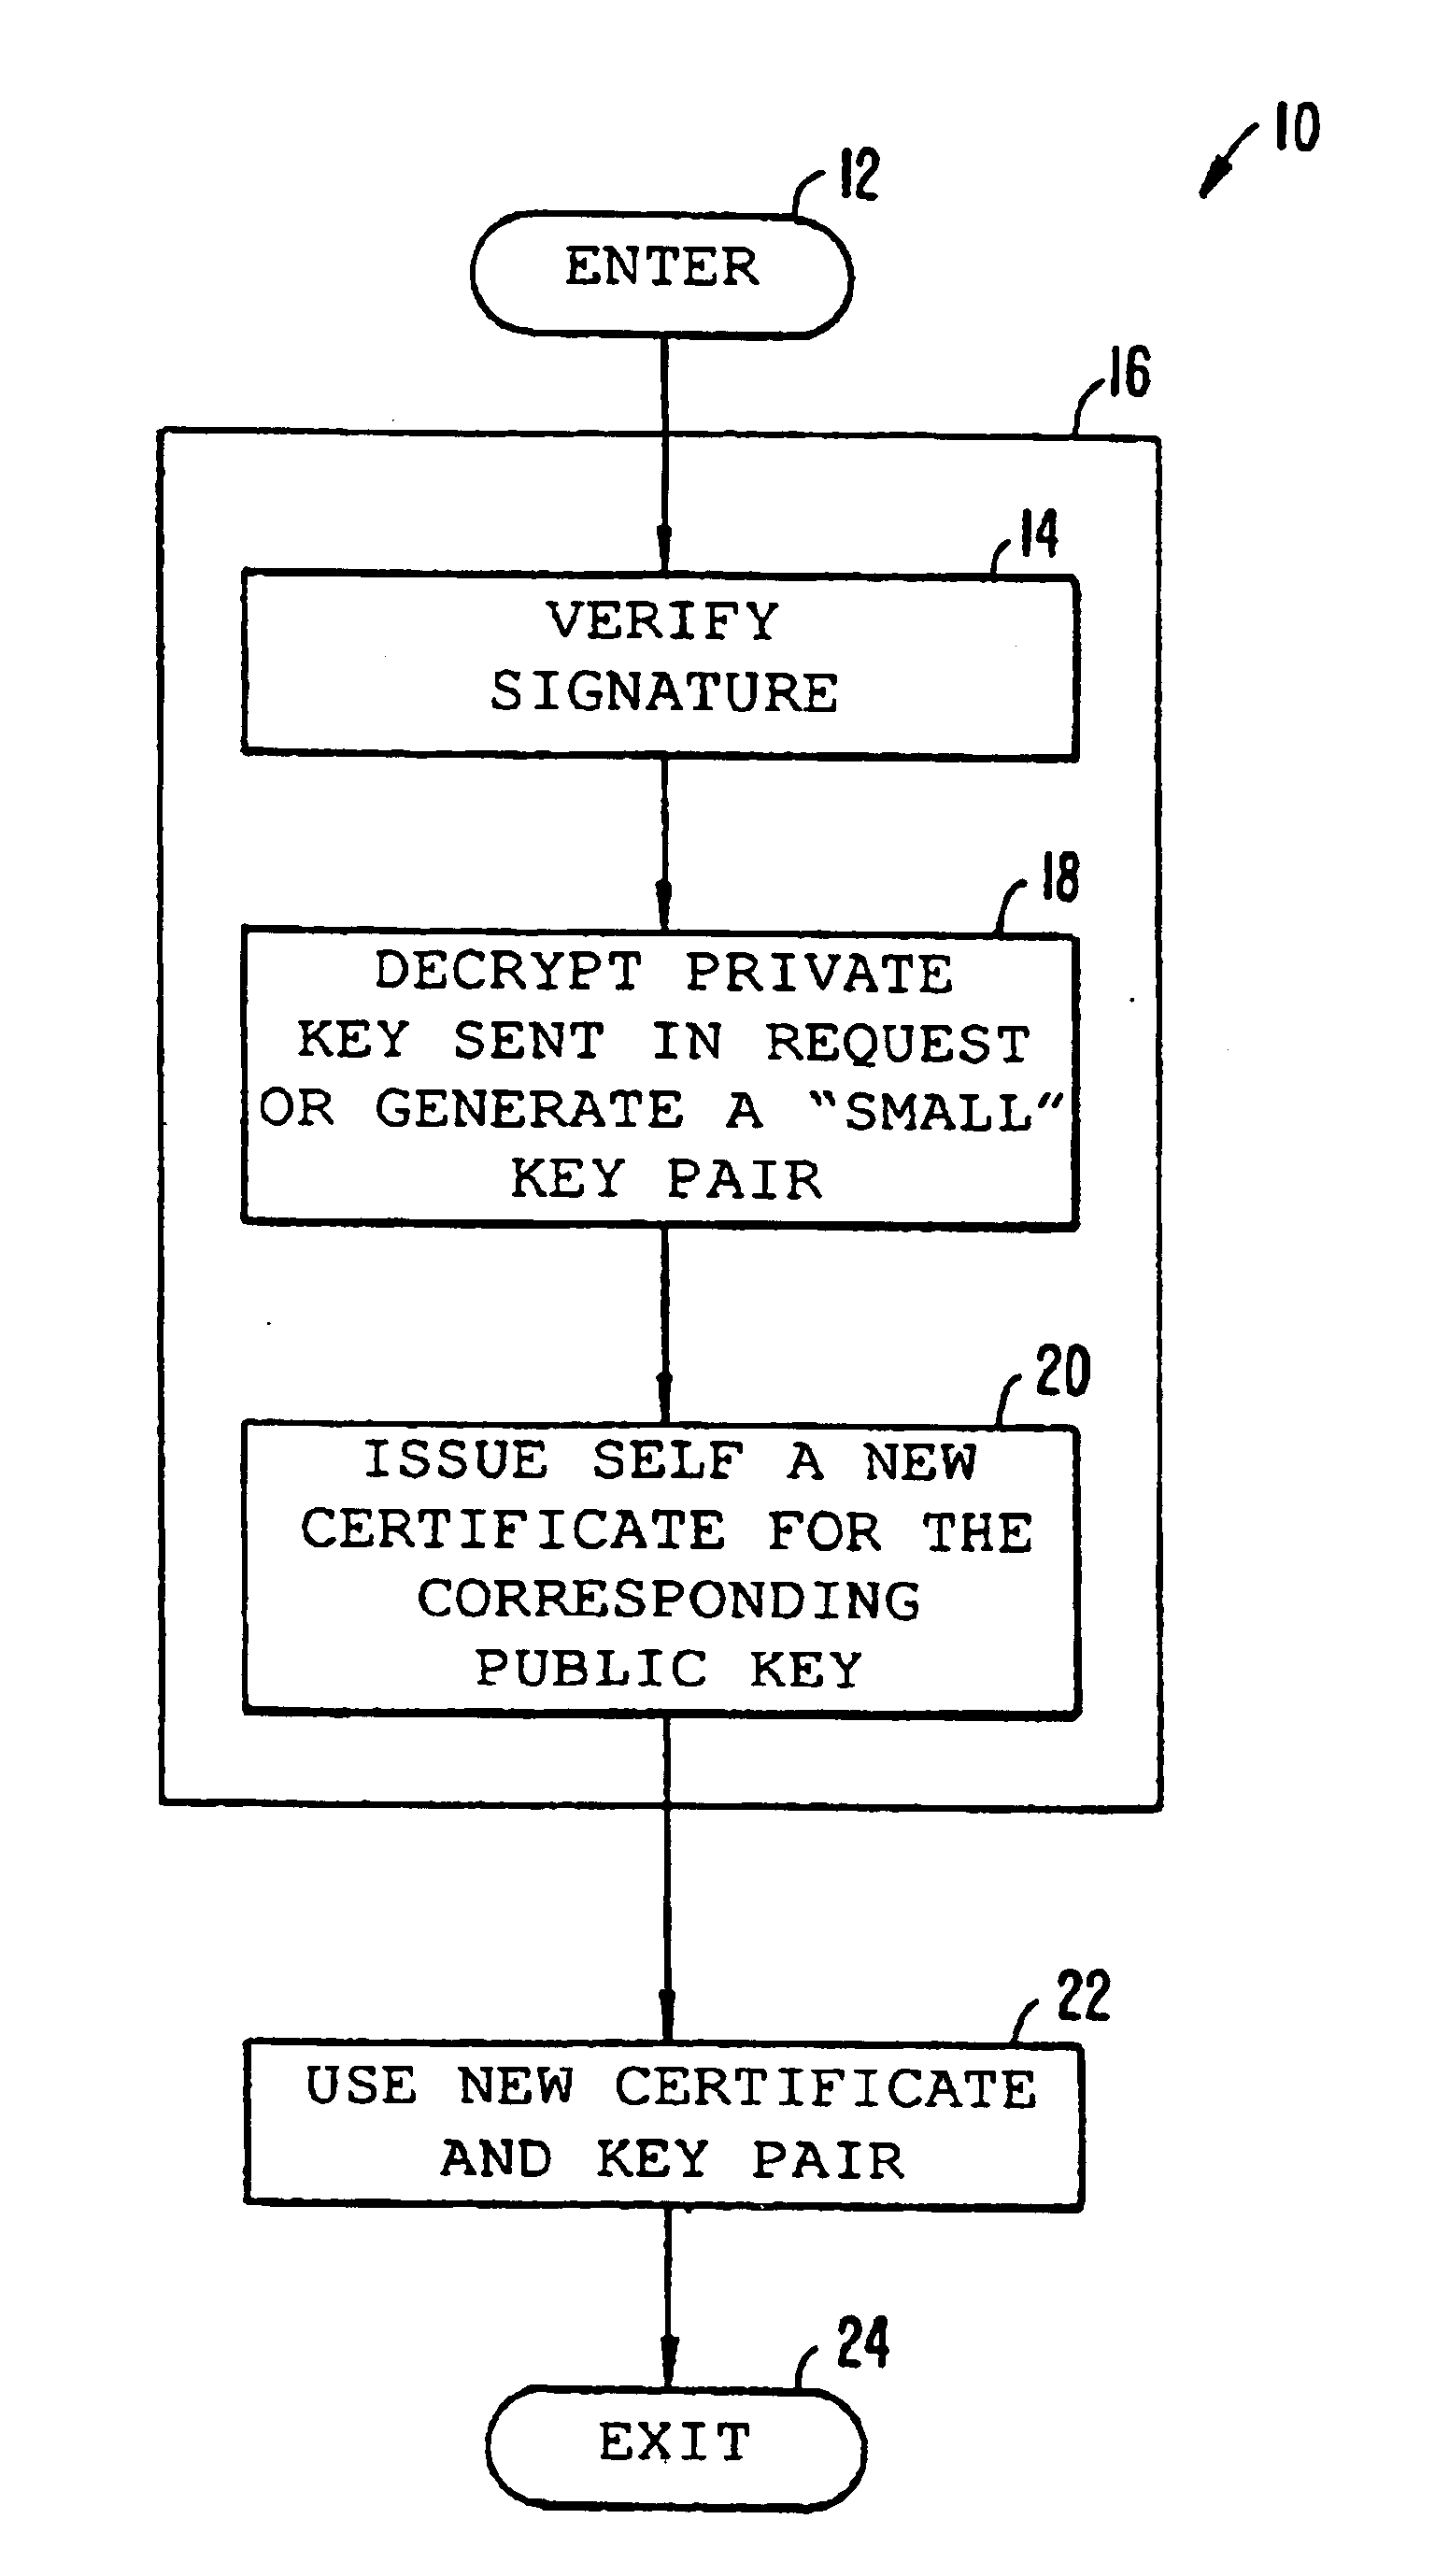 Self-generation of certificates using secure microprocessor in a device for transferring digital information